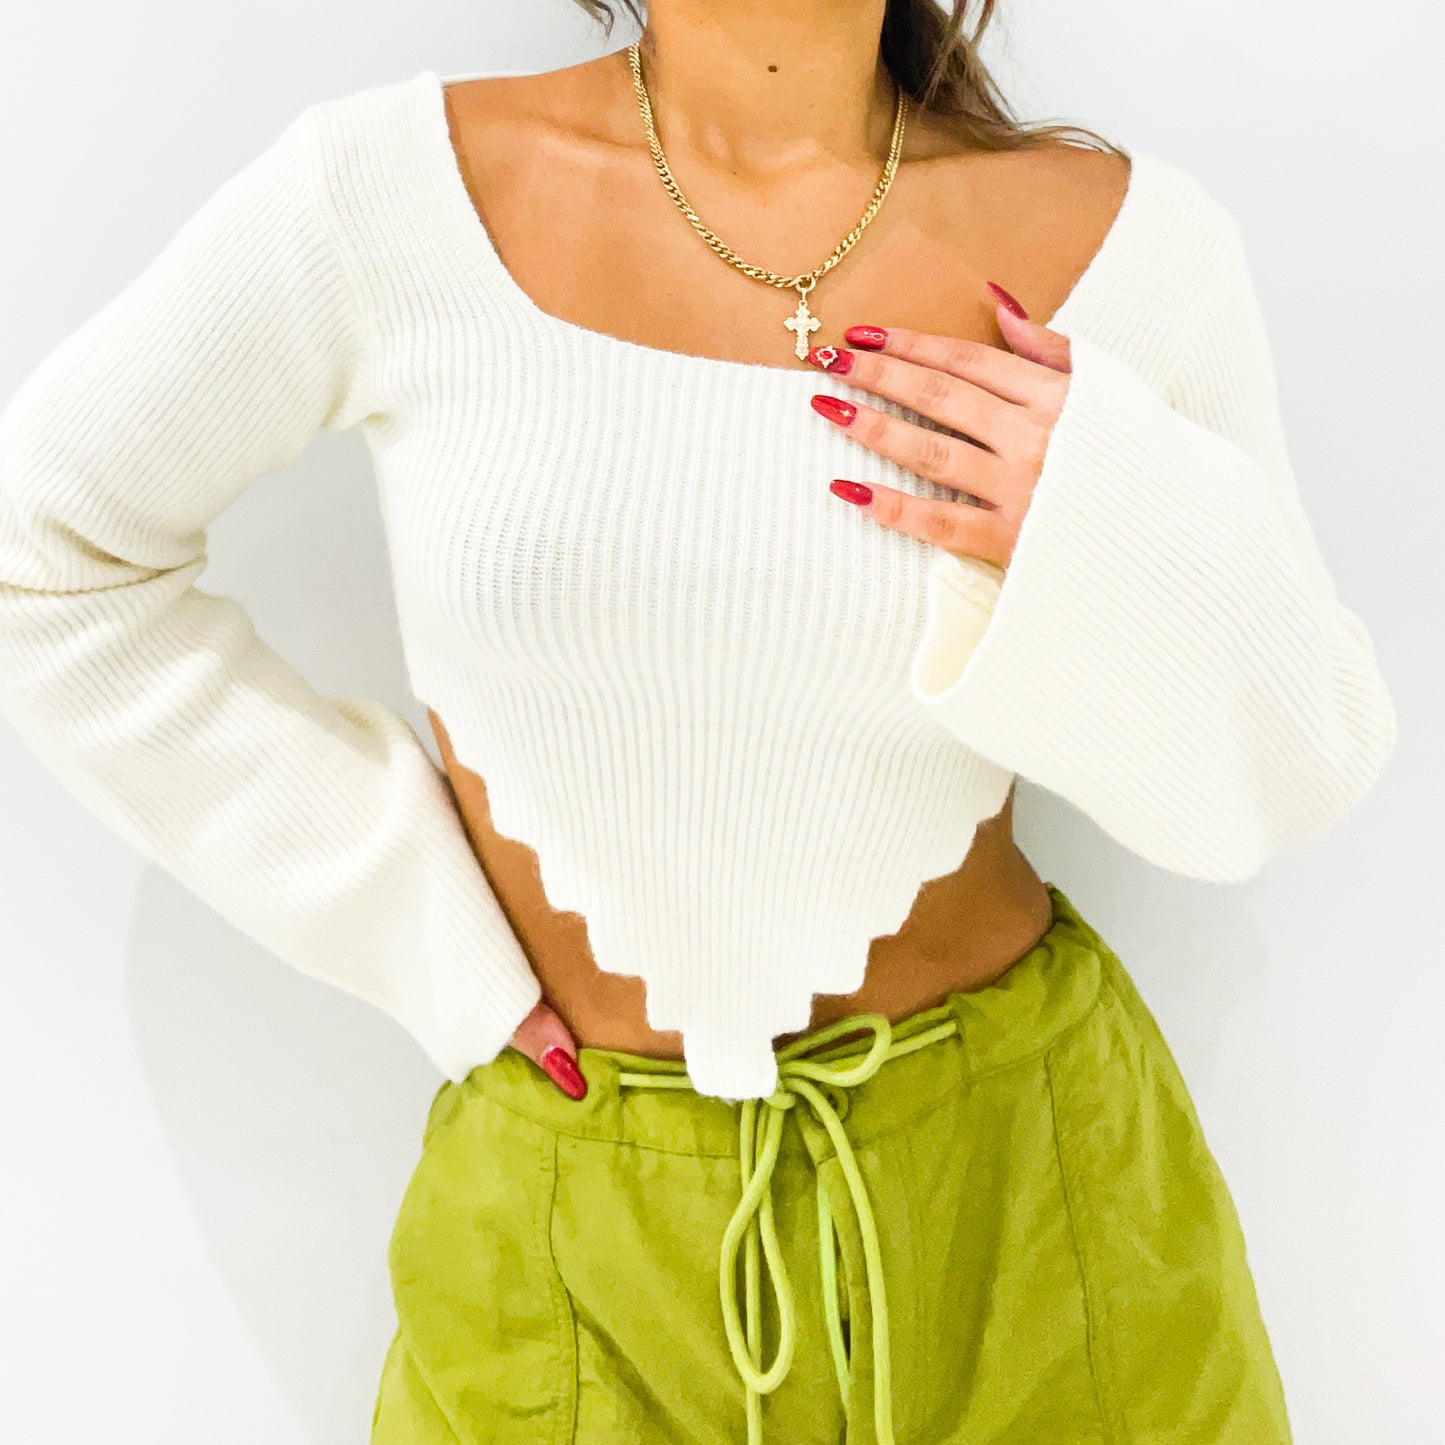 SWEATER KNOT TOP